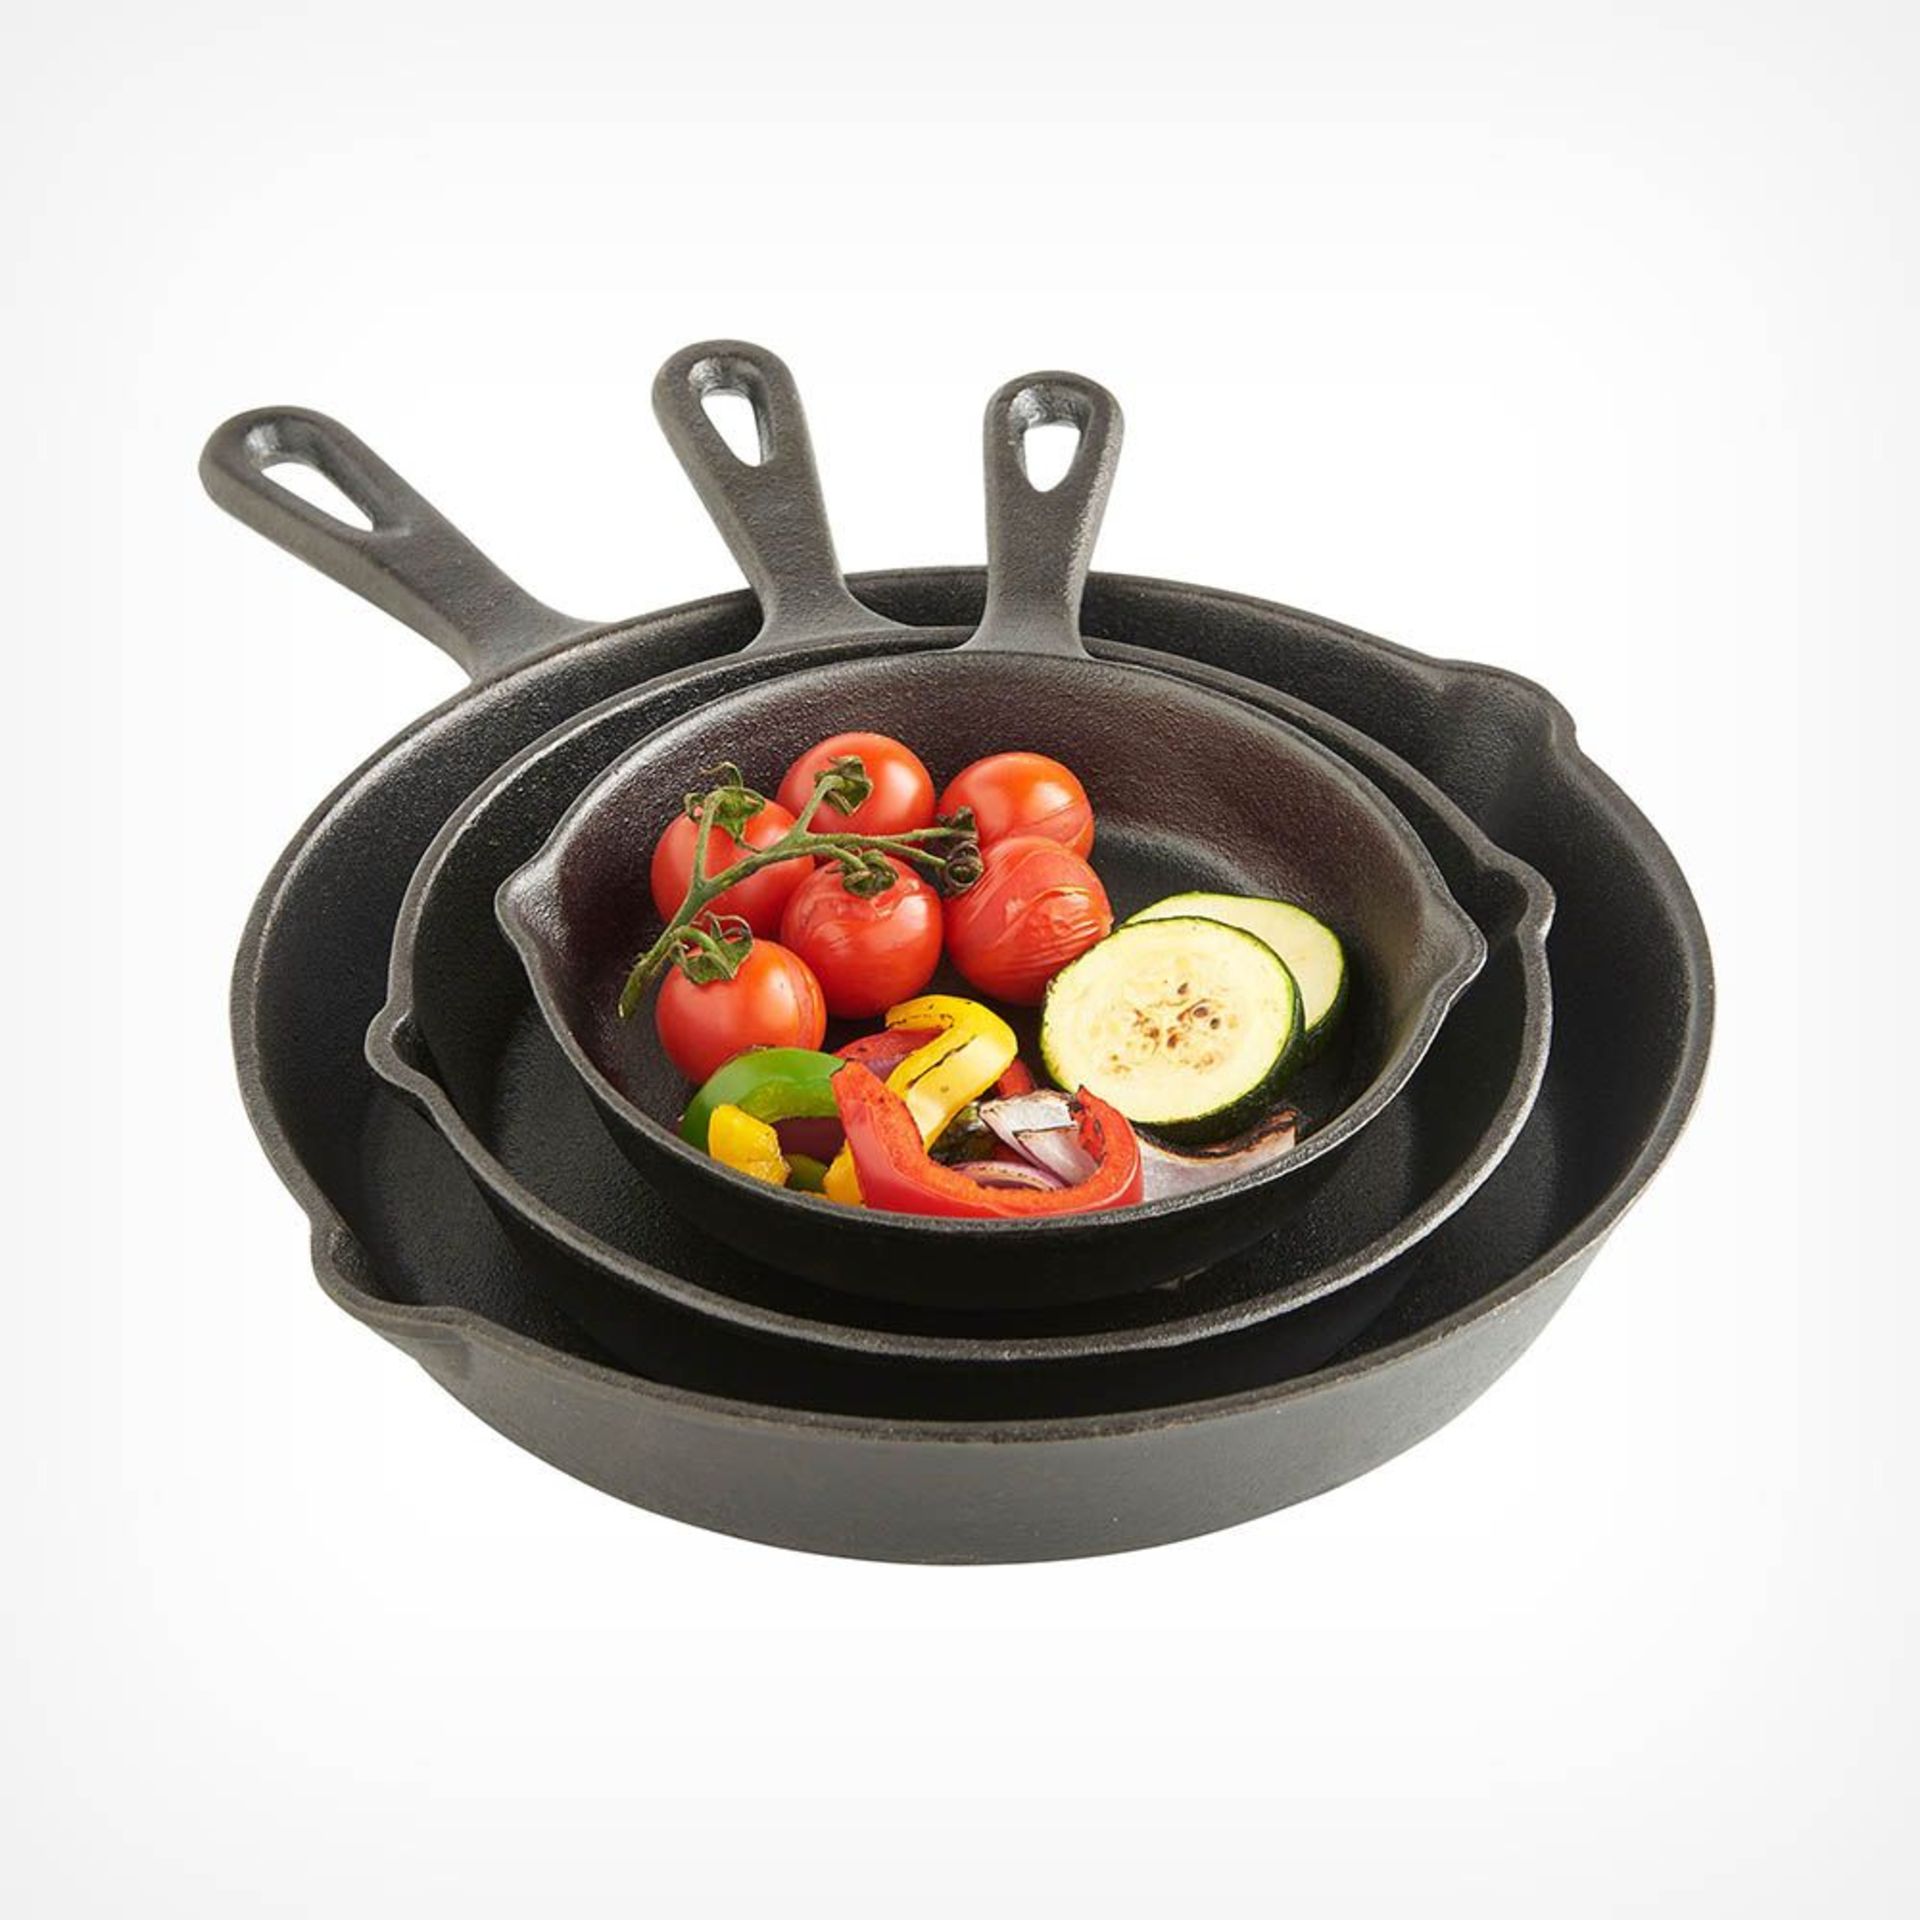 3pc Cast Iron Skillet Set. - BI. Many chefs and other professionals swear by cast iron pans